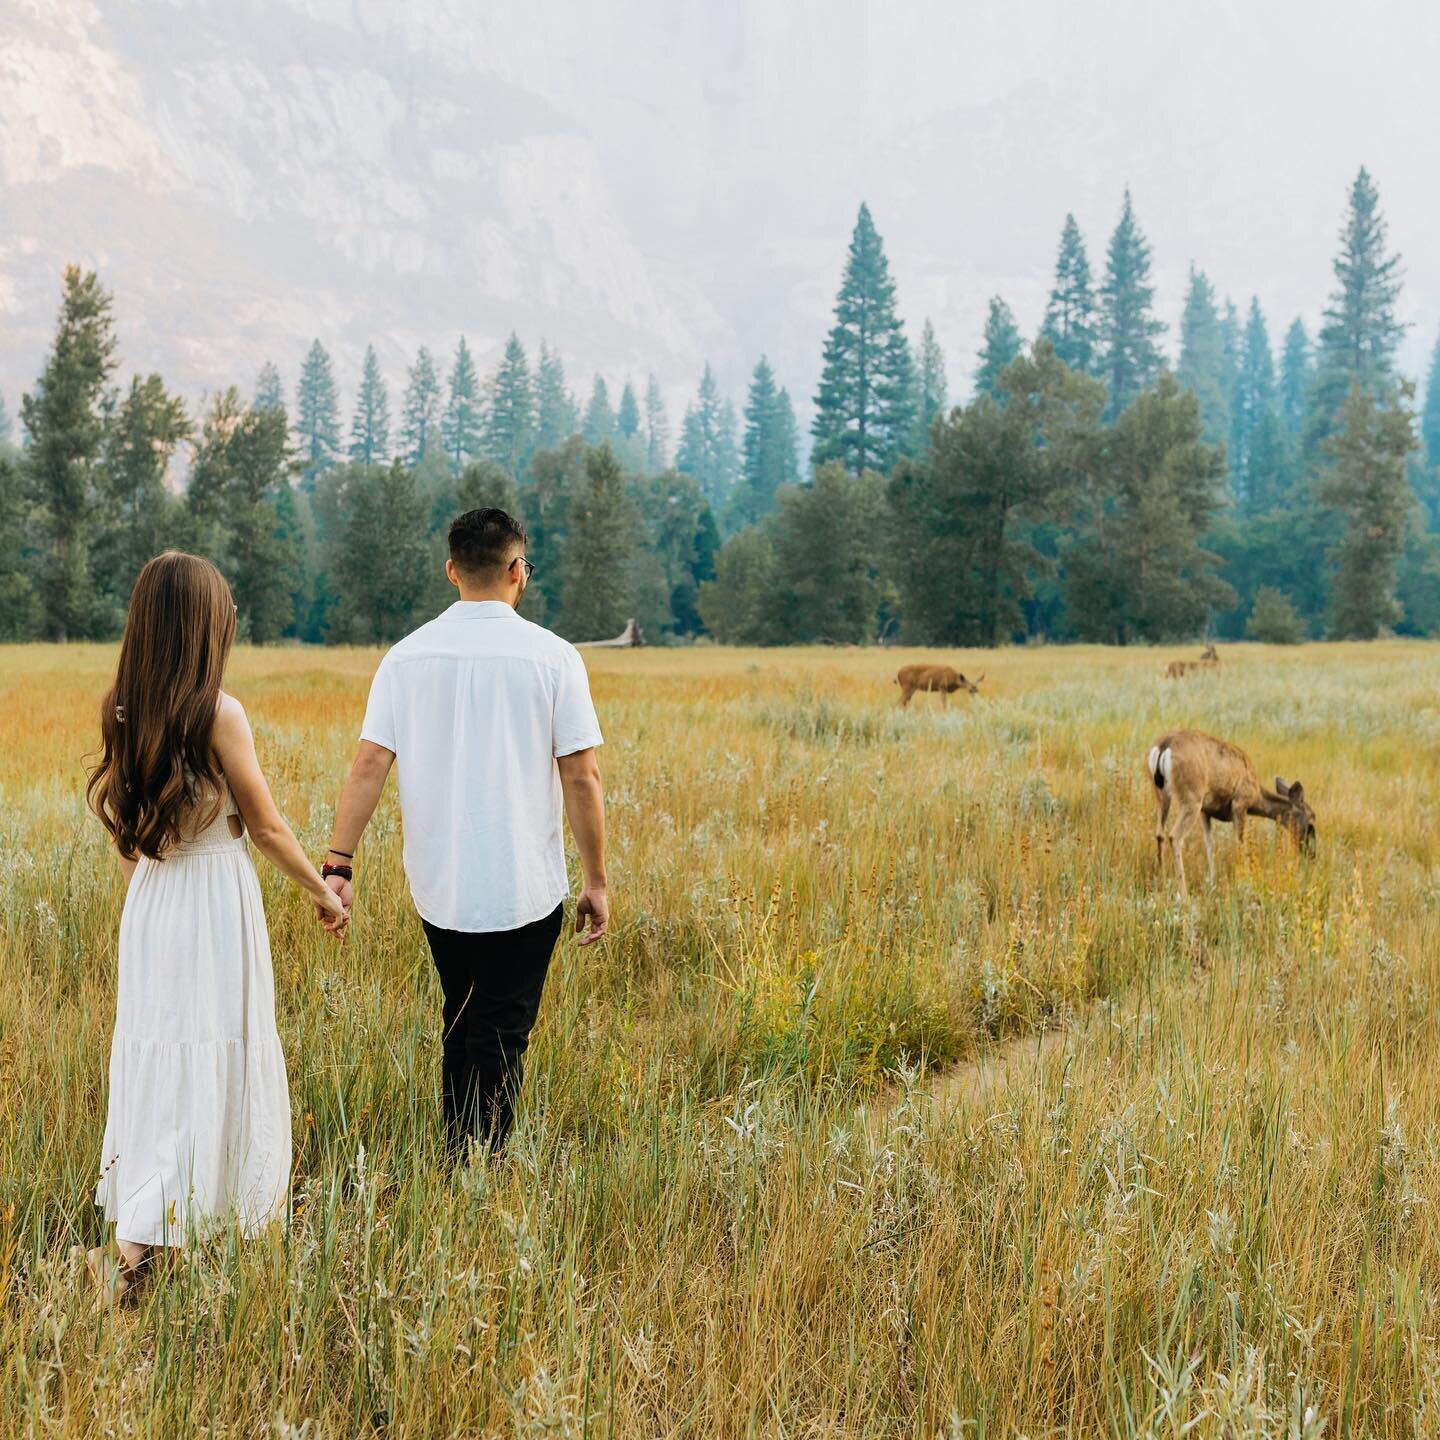 The most beautiful sunrise stroll in Yosemite 🥹 the deers were all over the valley meadows and I can truly say this was one of the prettiest summer sunrises I&rsquo;ve seen✨